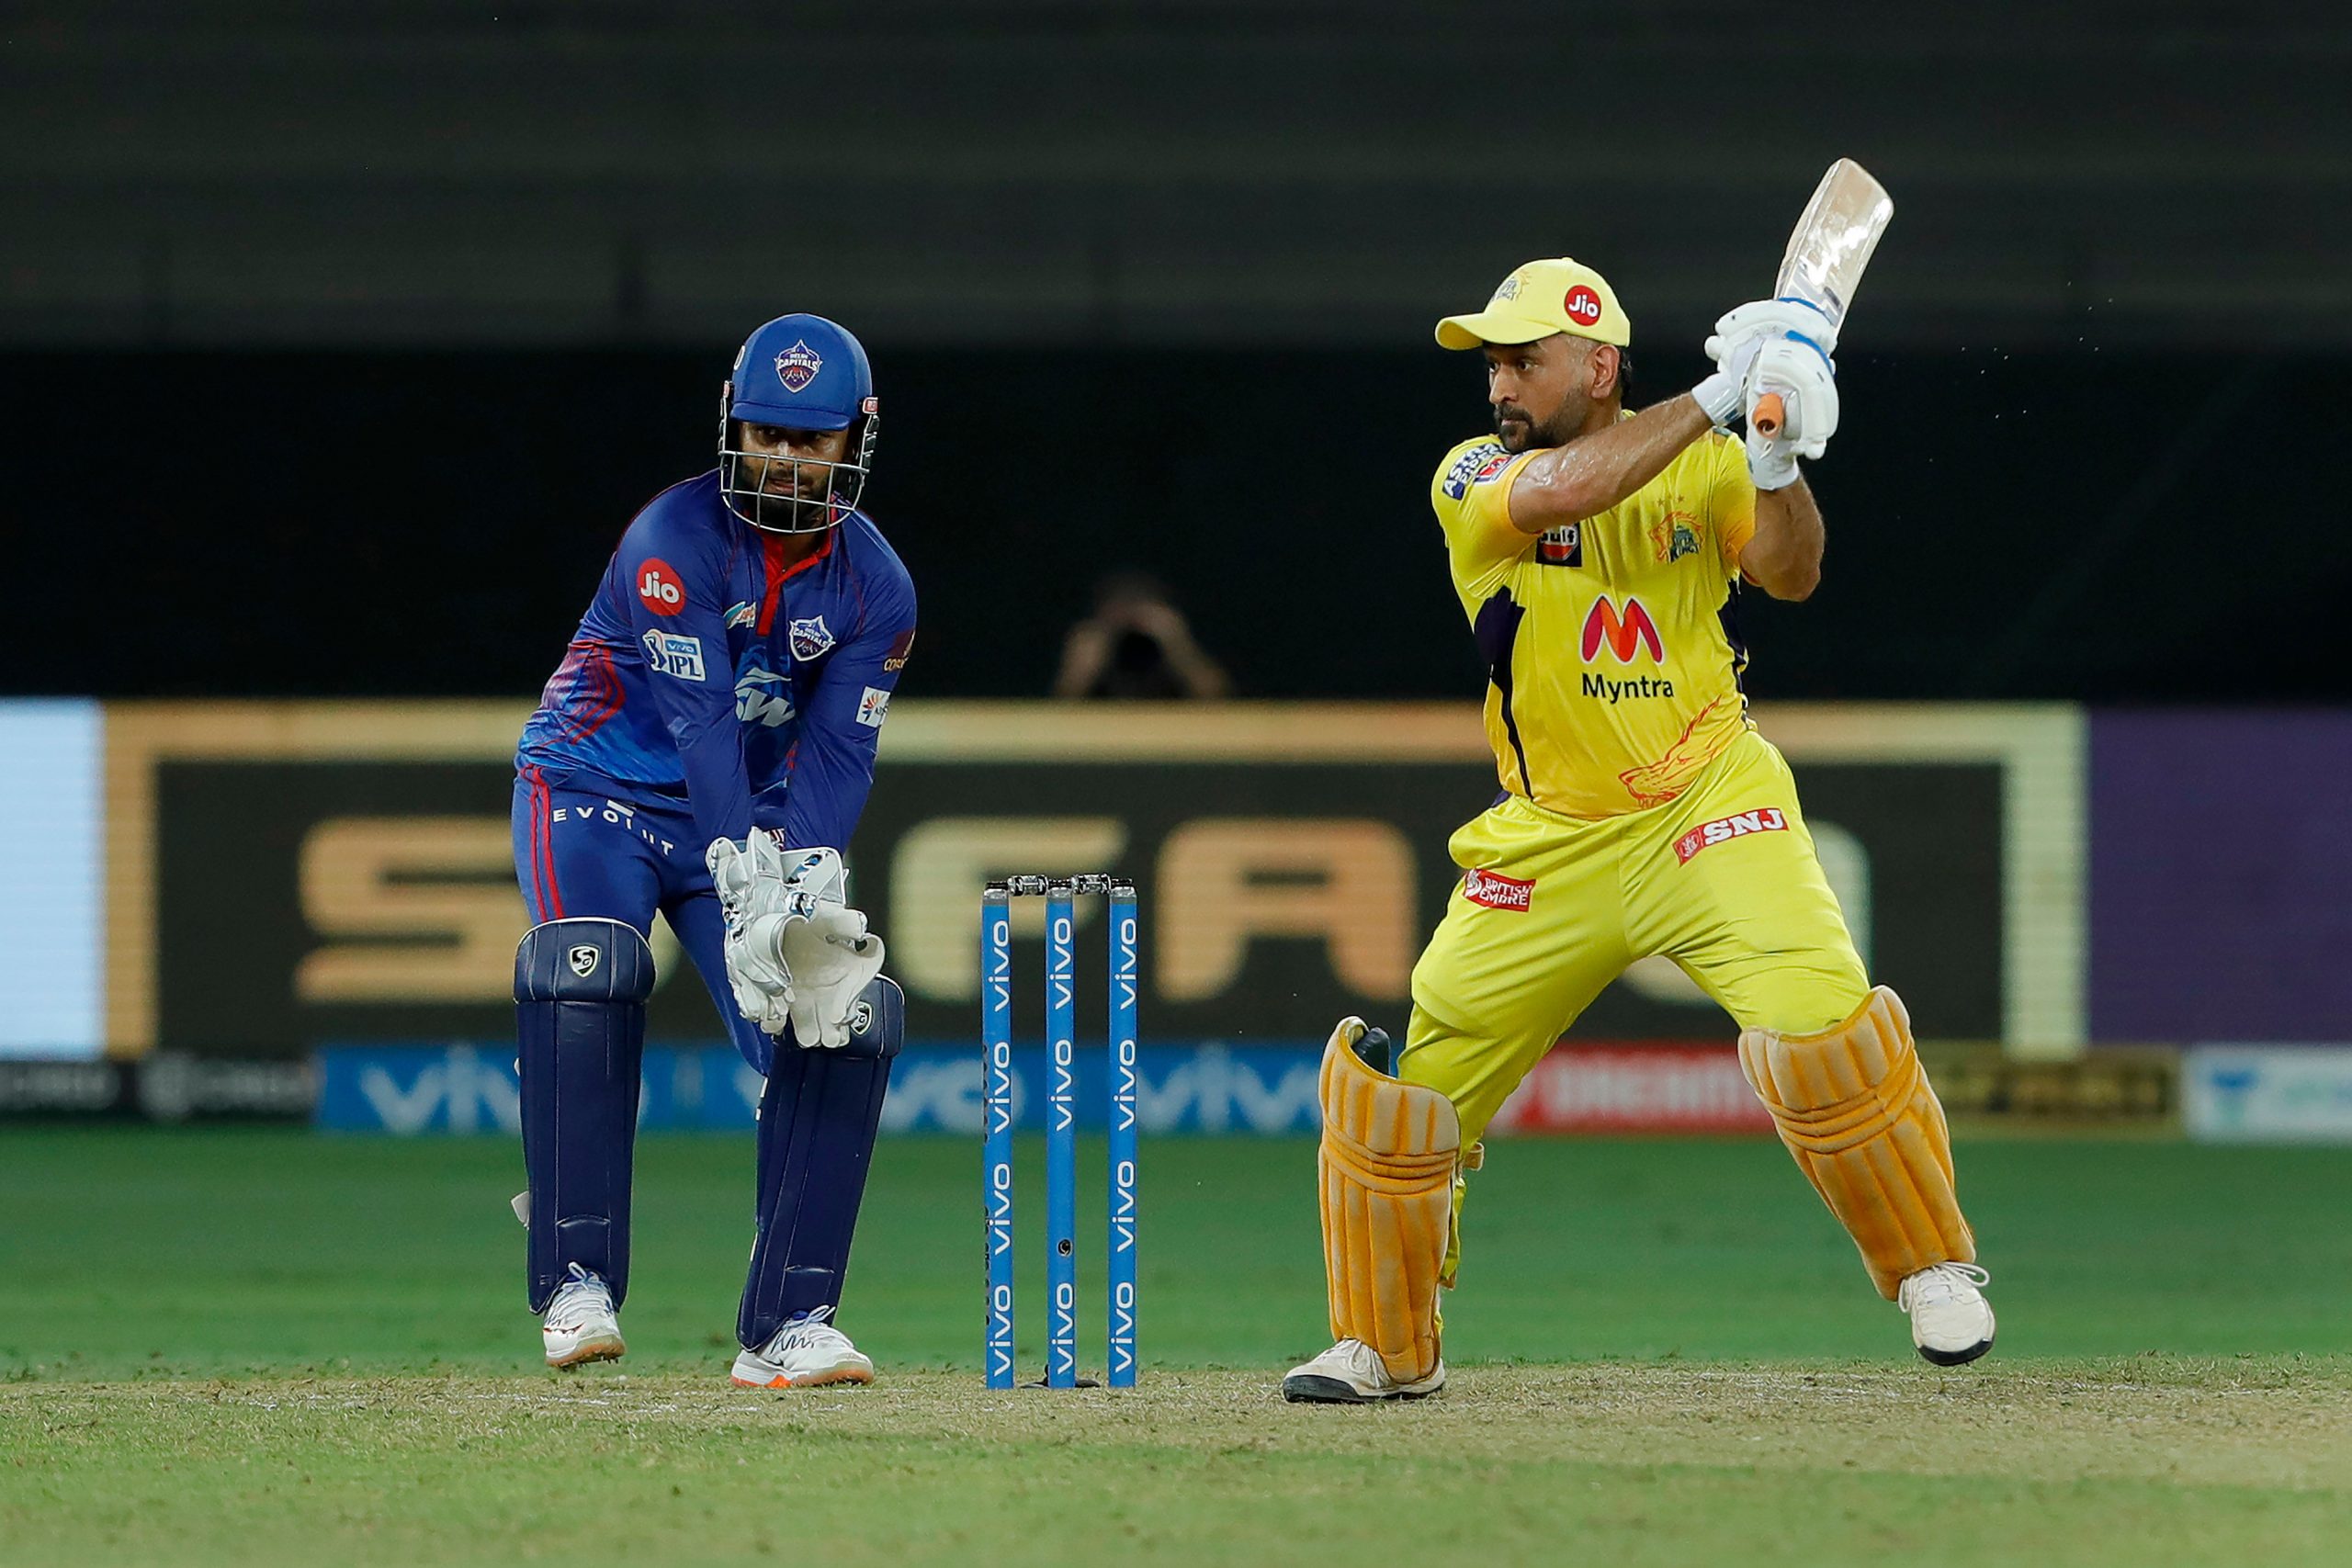 IPL 2021, DC vs CSK: When and where to watch live telecast, streaming